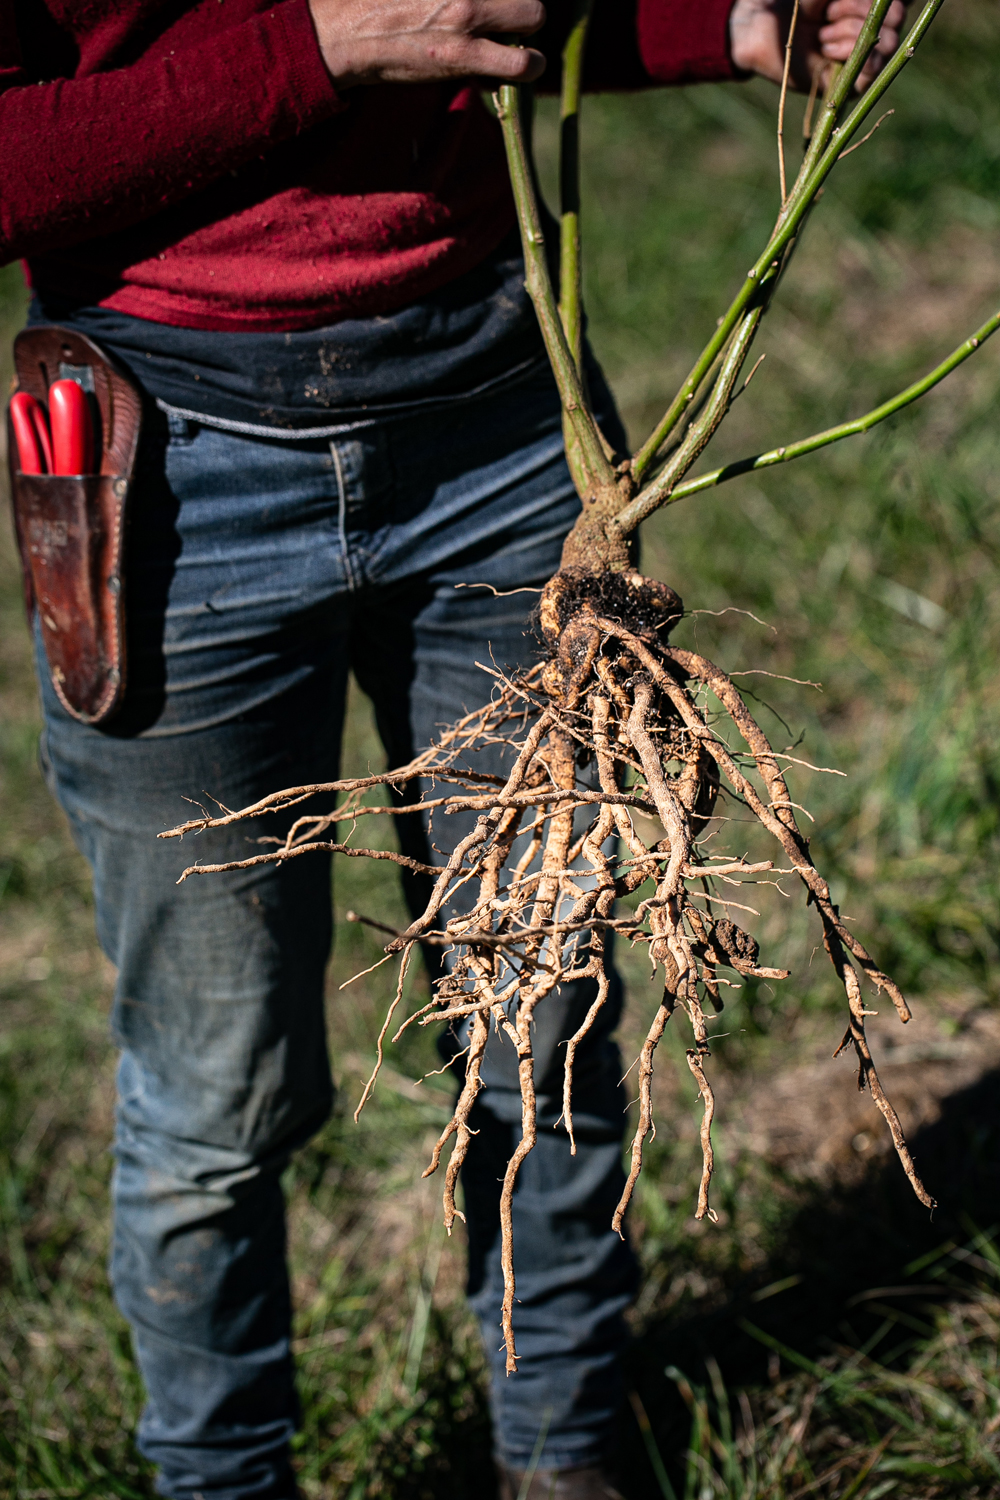 The roots of a freshly harvested ashwagandha plant.